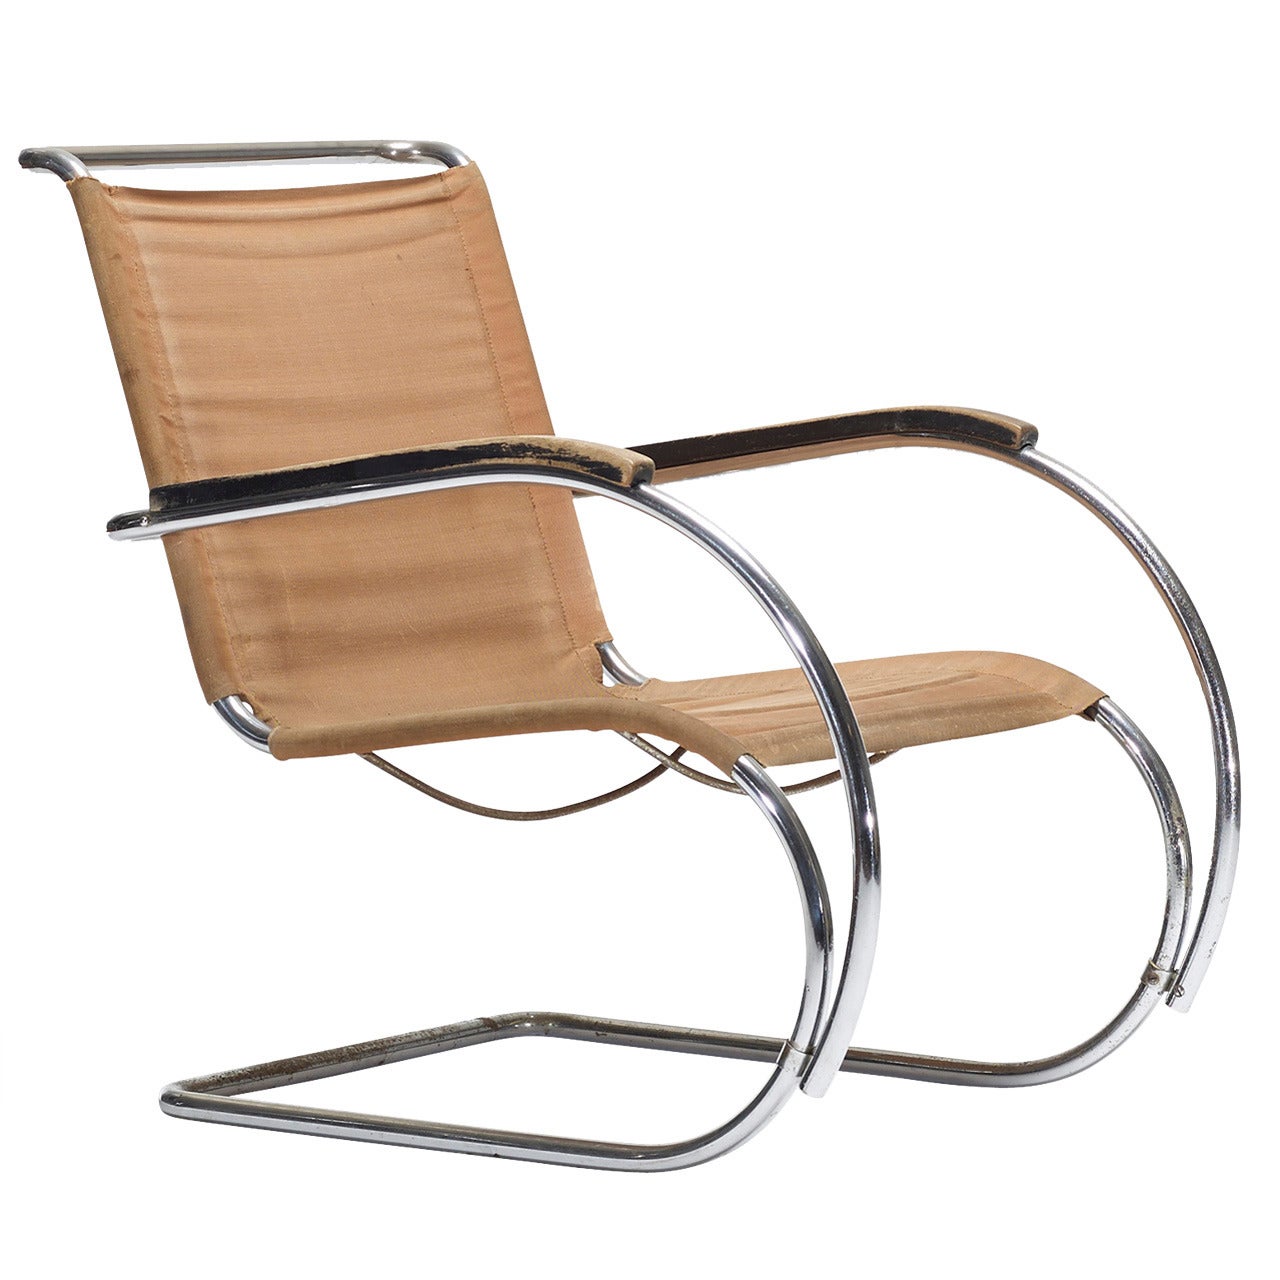 MR40 lounge chair by Ludwig Mies van der Rohe For Sale